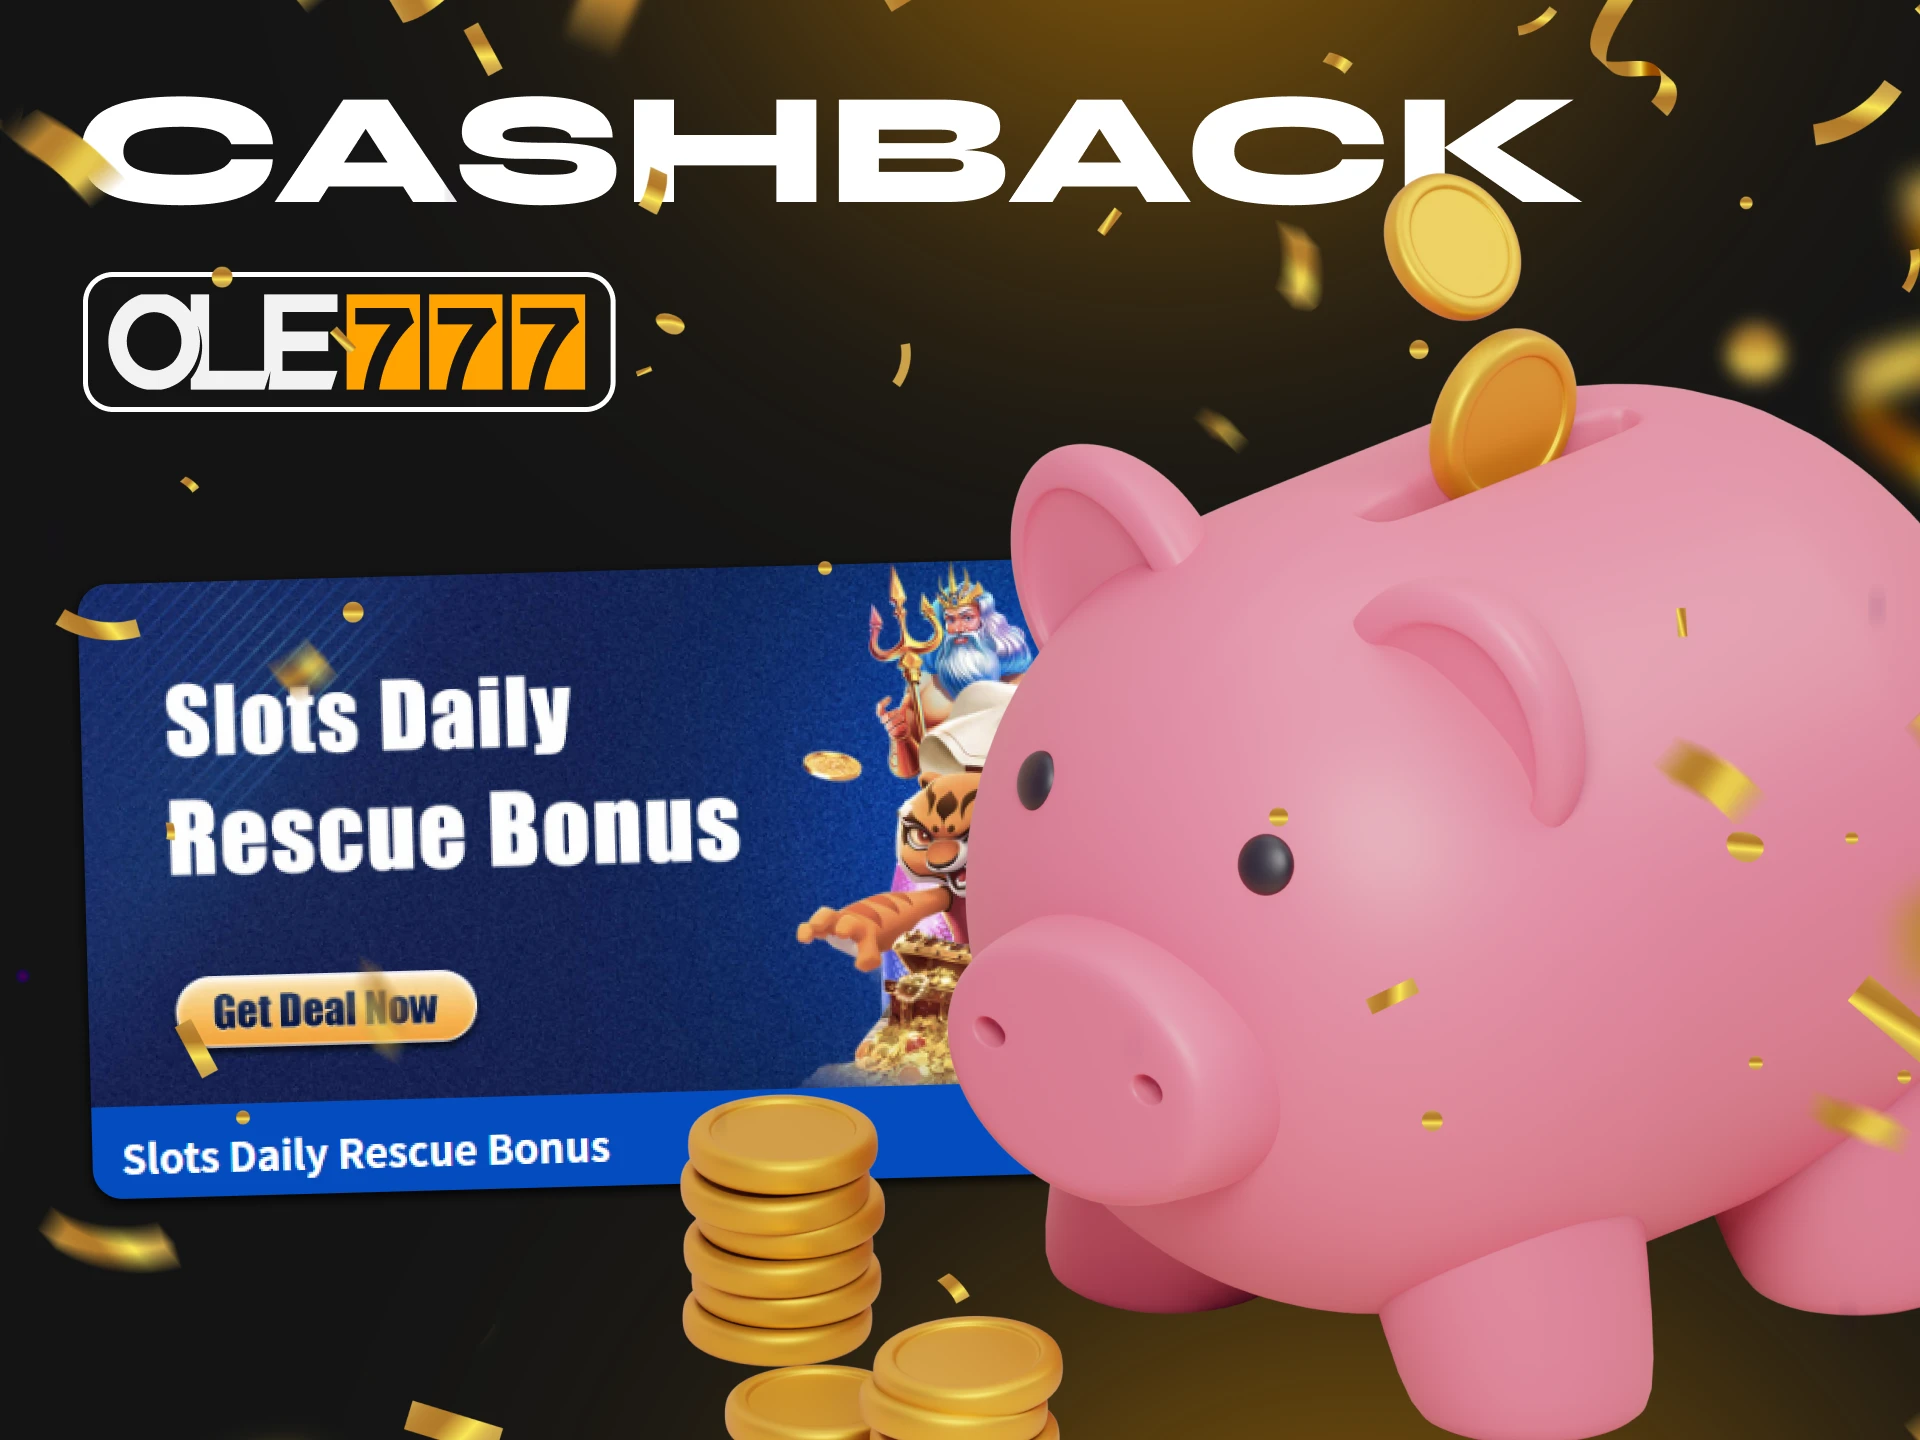 You can count on cashback when playing slots at Ole777 casino.